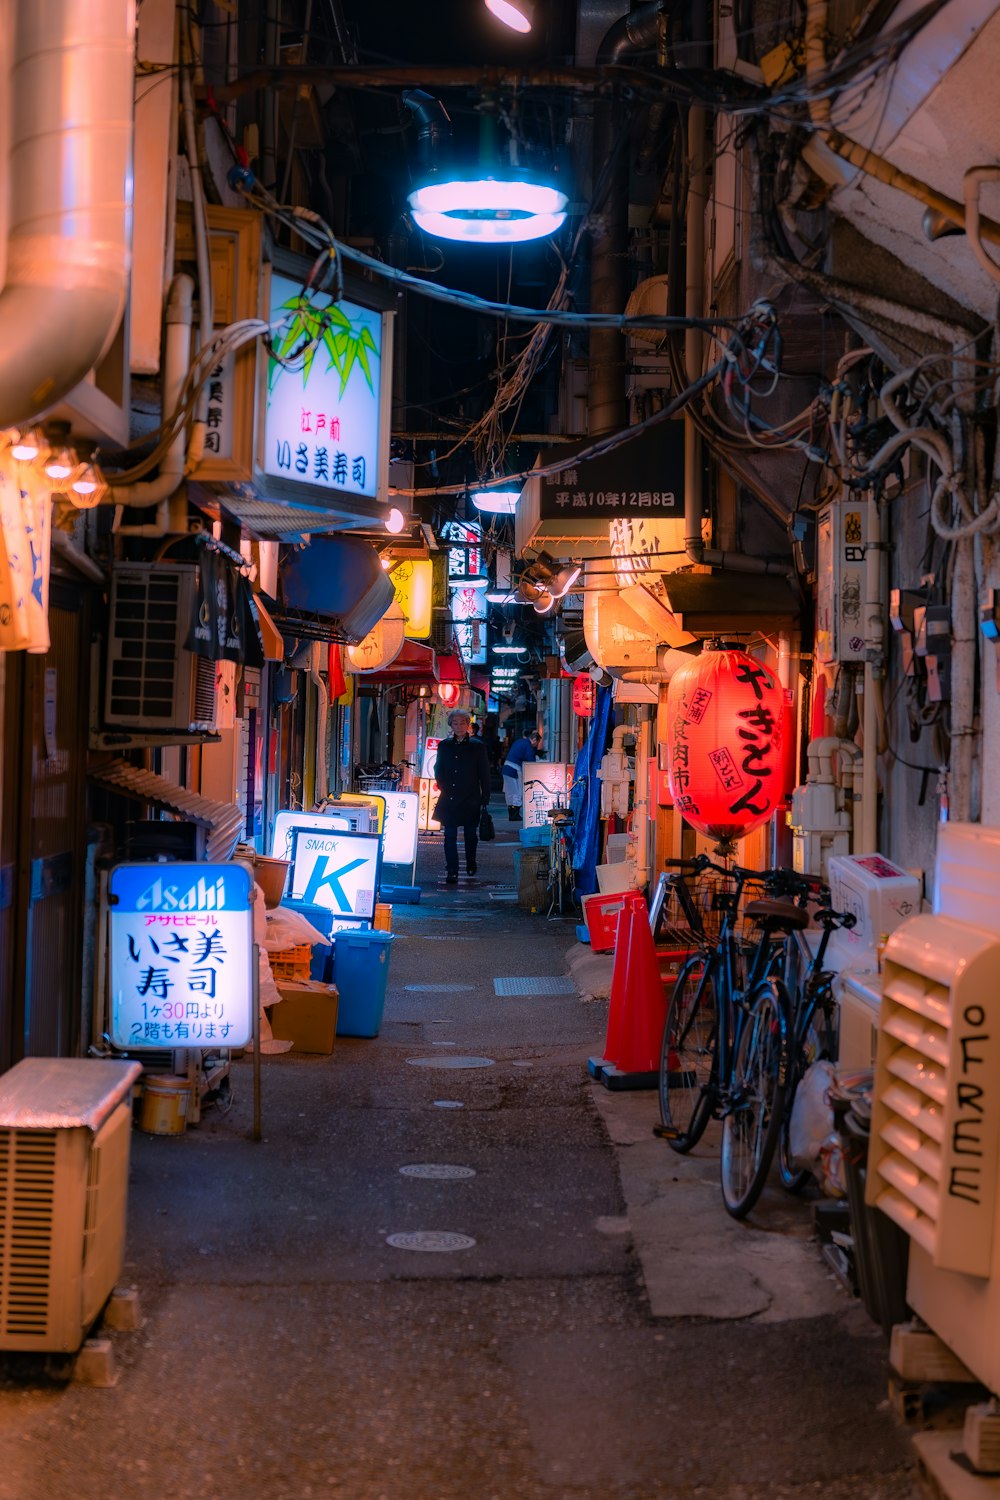 a narrow alley way with lots of signs and lights